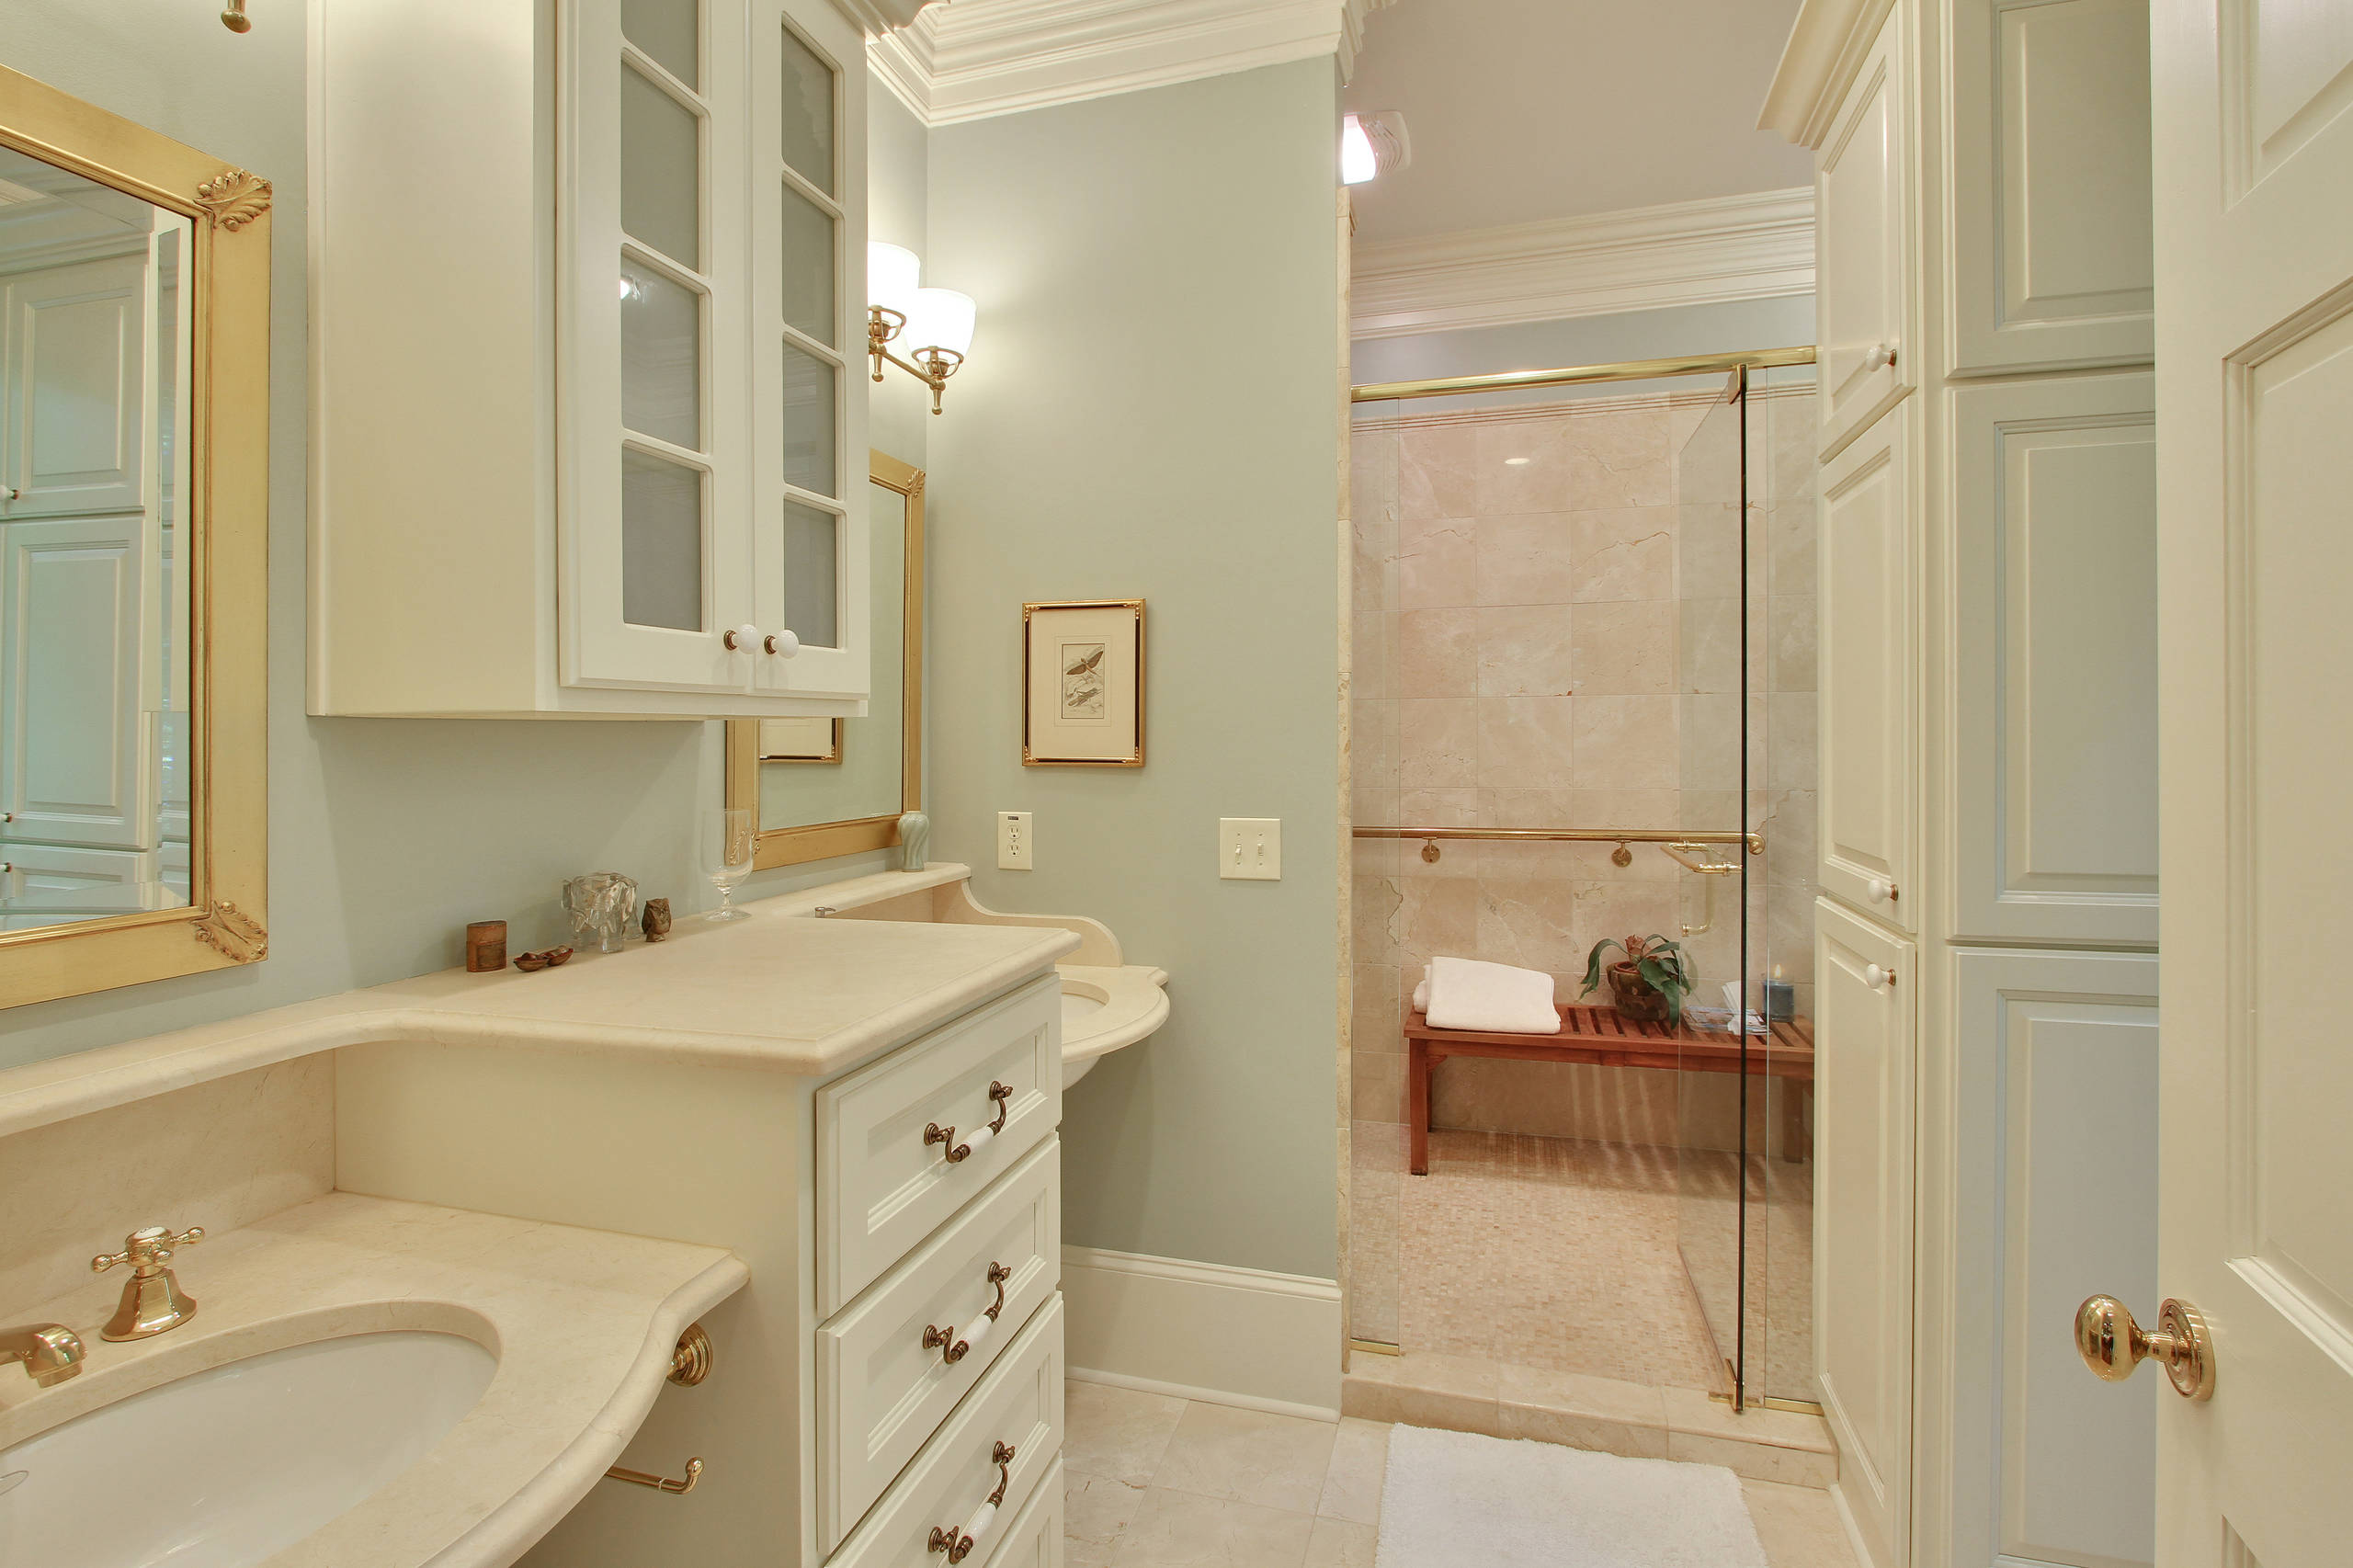 I don't believe in large wasted space to heat/cool/clean, so I designed this master bath with lots of hidden storage and re-created old style wall hung honed marble sinks from the 30's.  The shower ar